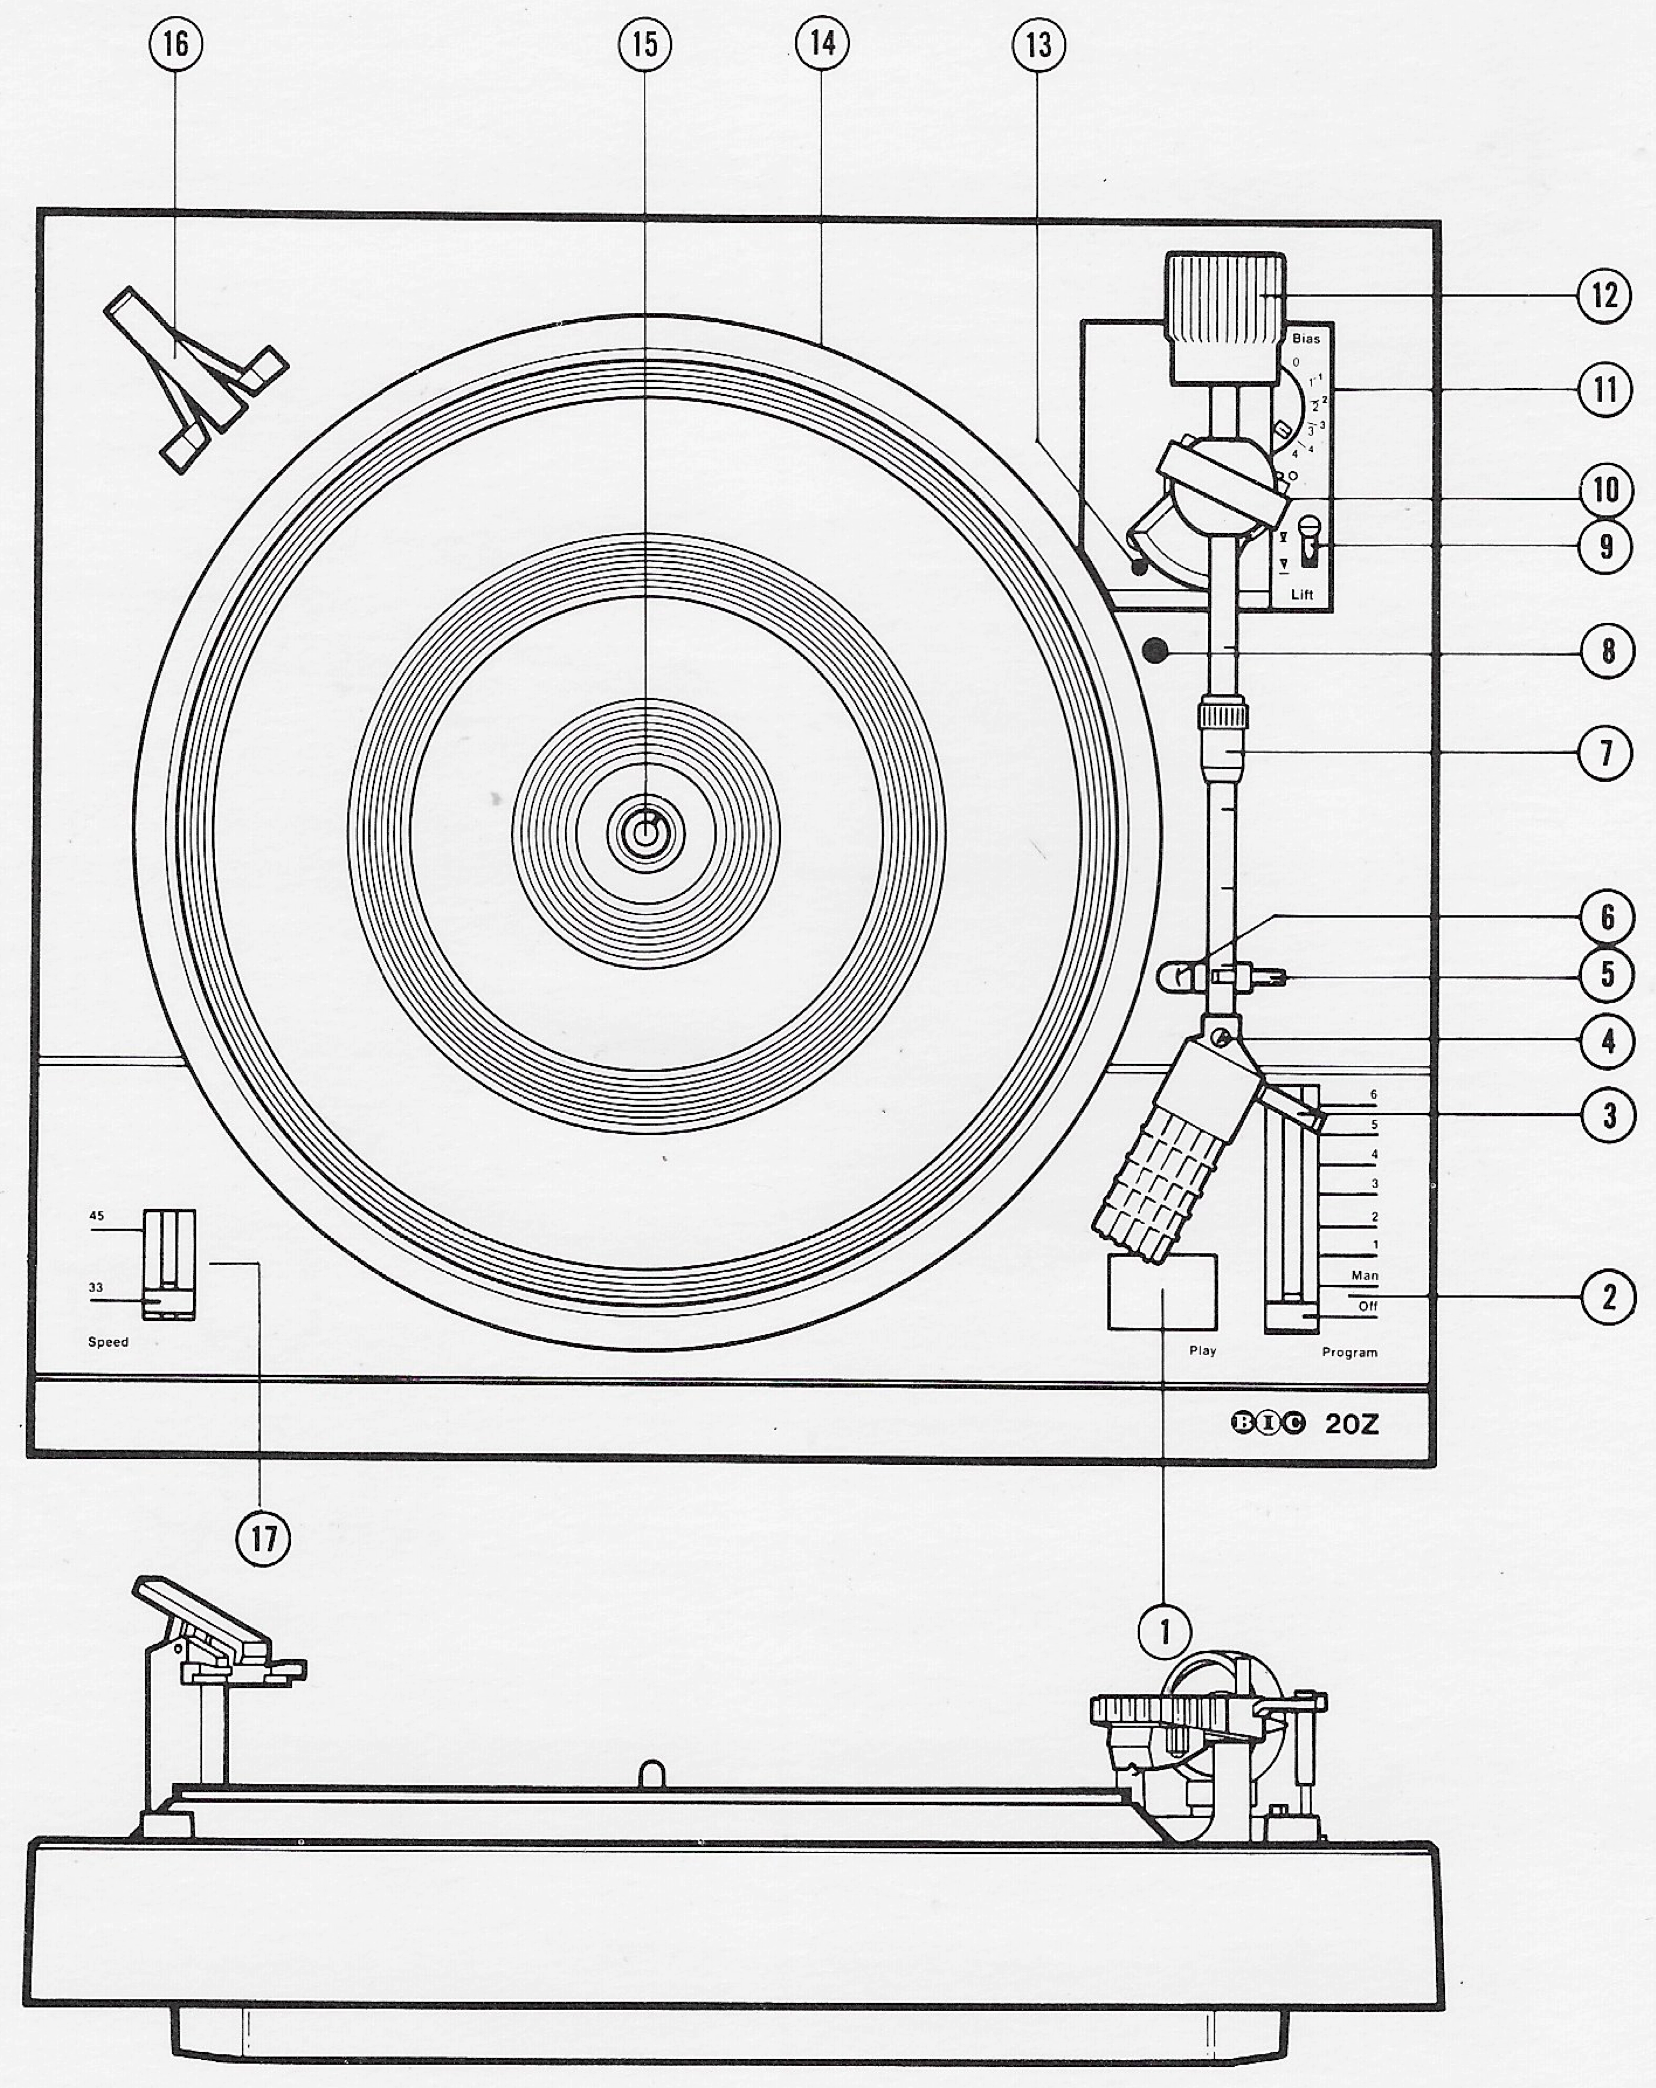 File:BIC Turntable manual 1.png - Wikimedia Commons